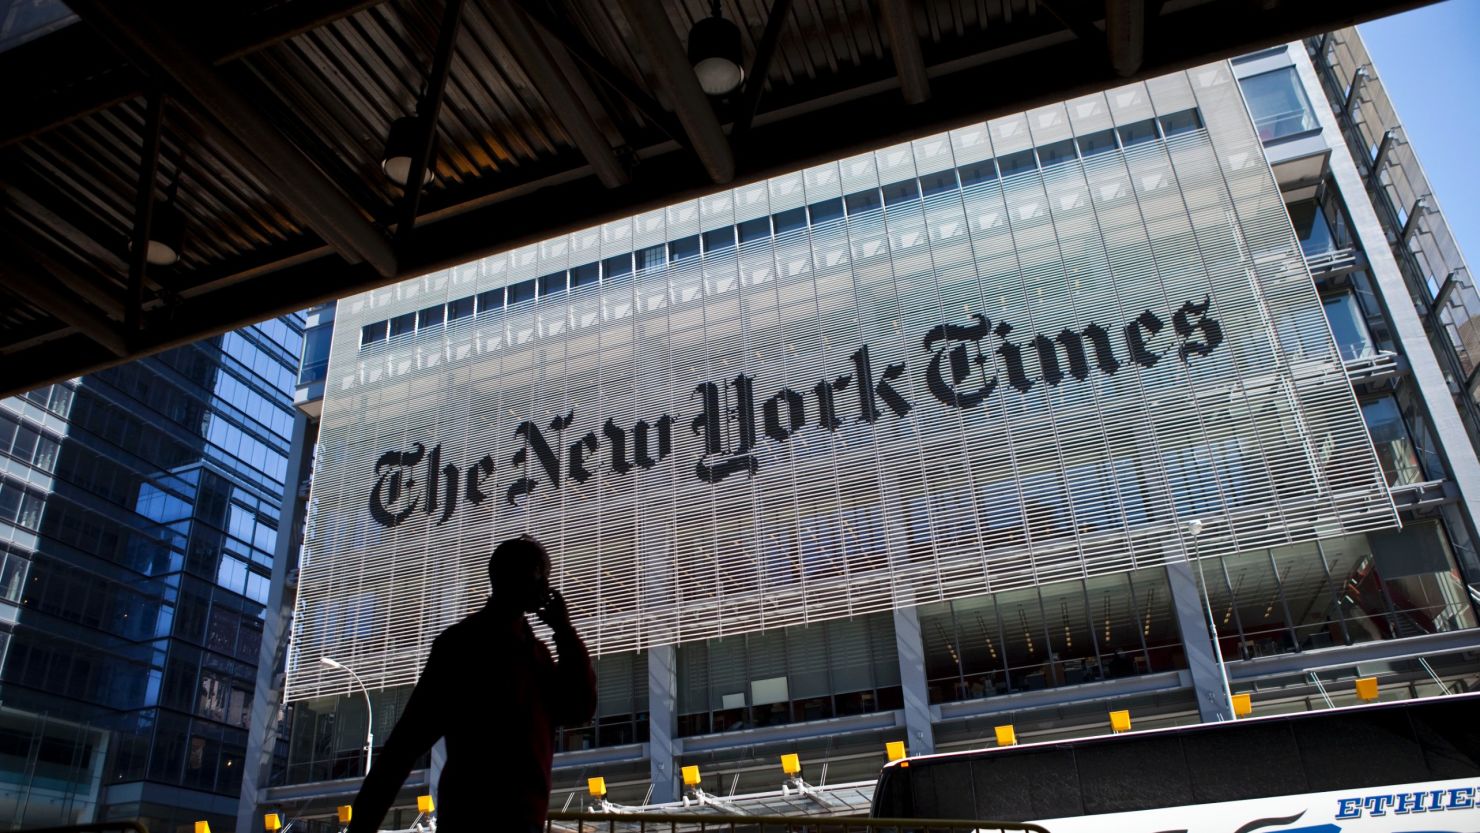 The New York Times' website has been inaccessible for many users since Tuesday afternoon.